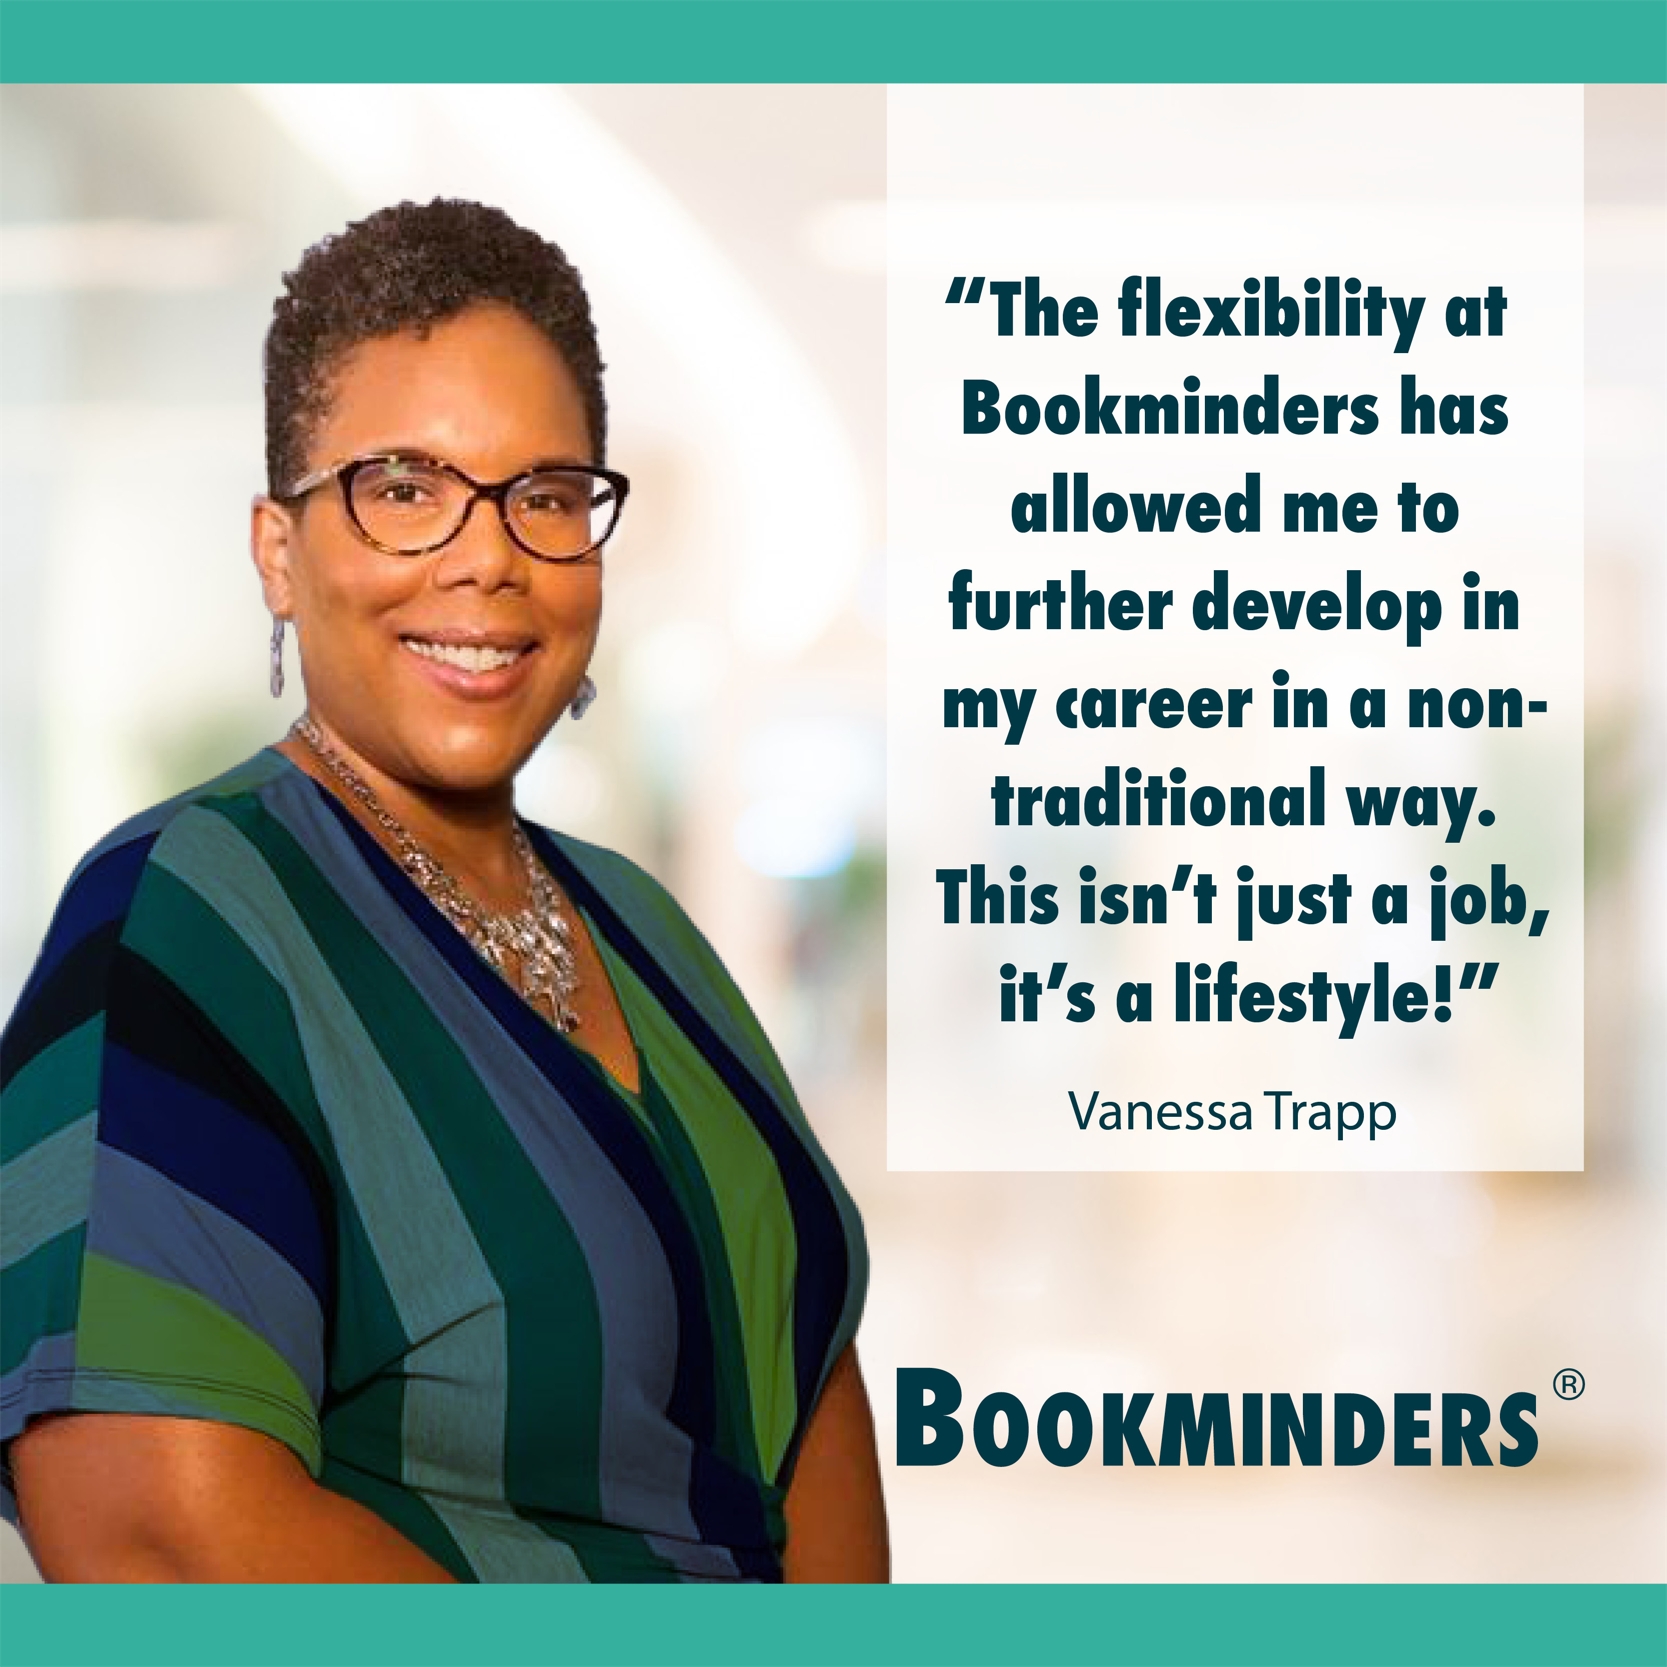 The flexibility at Bookminders has allowed me to further develop in my career in a non-traditional way. This isn't just a job, it's a lifestyle!